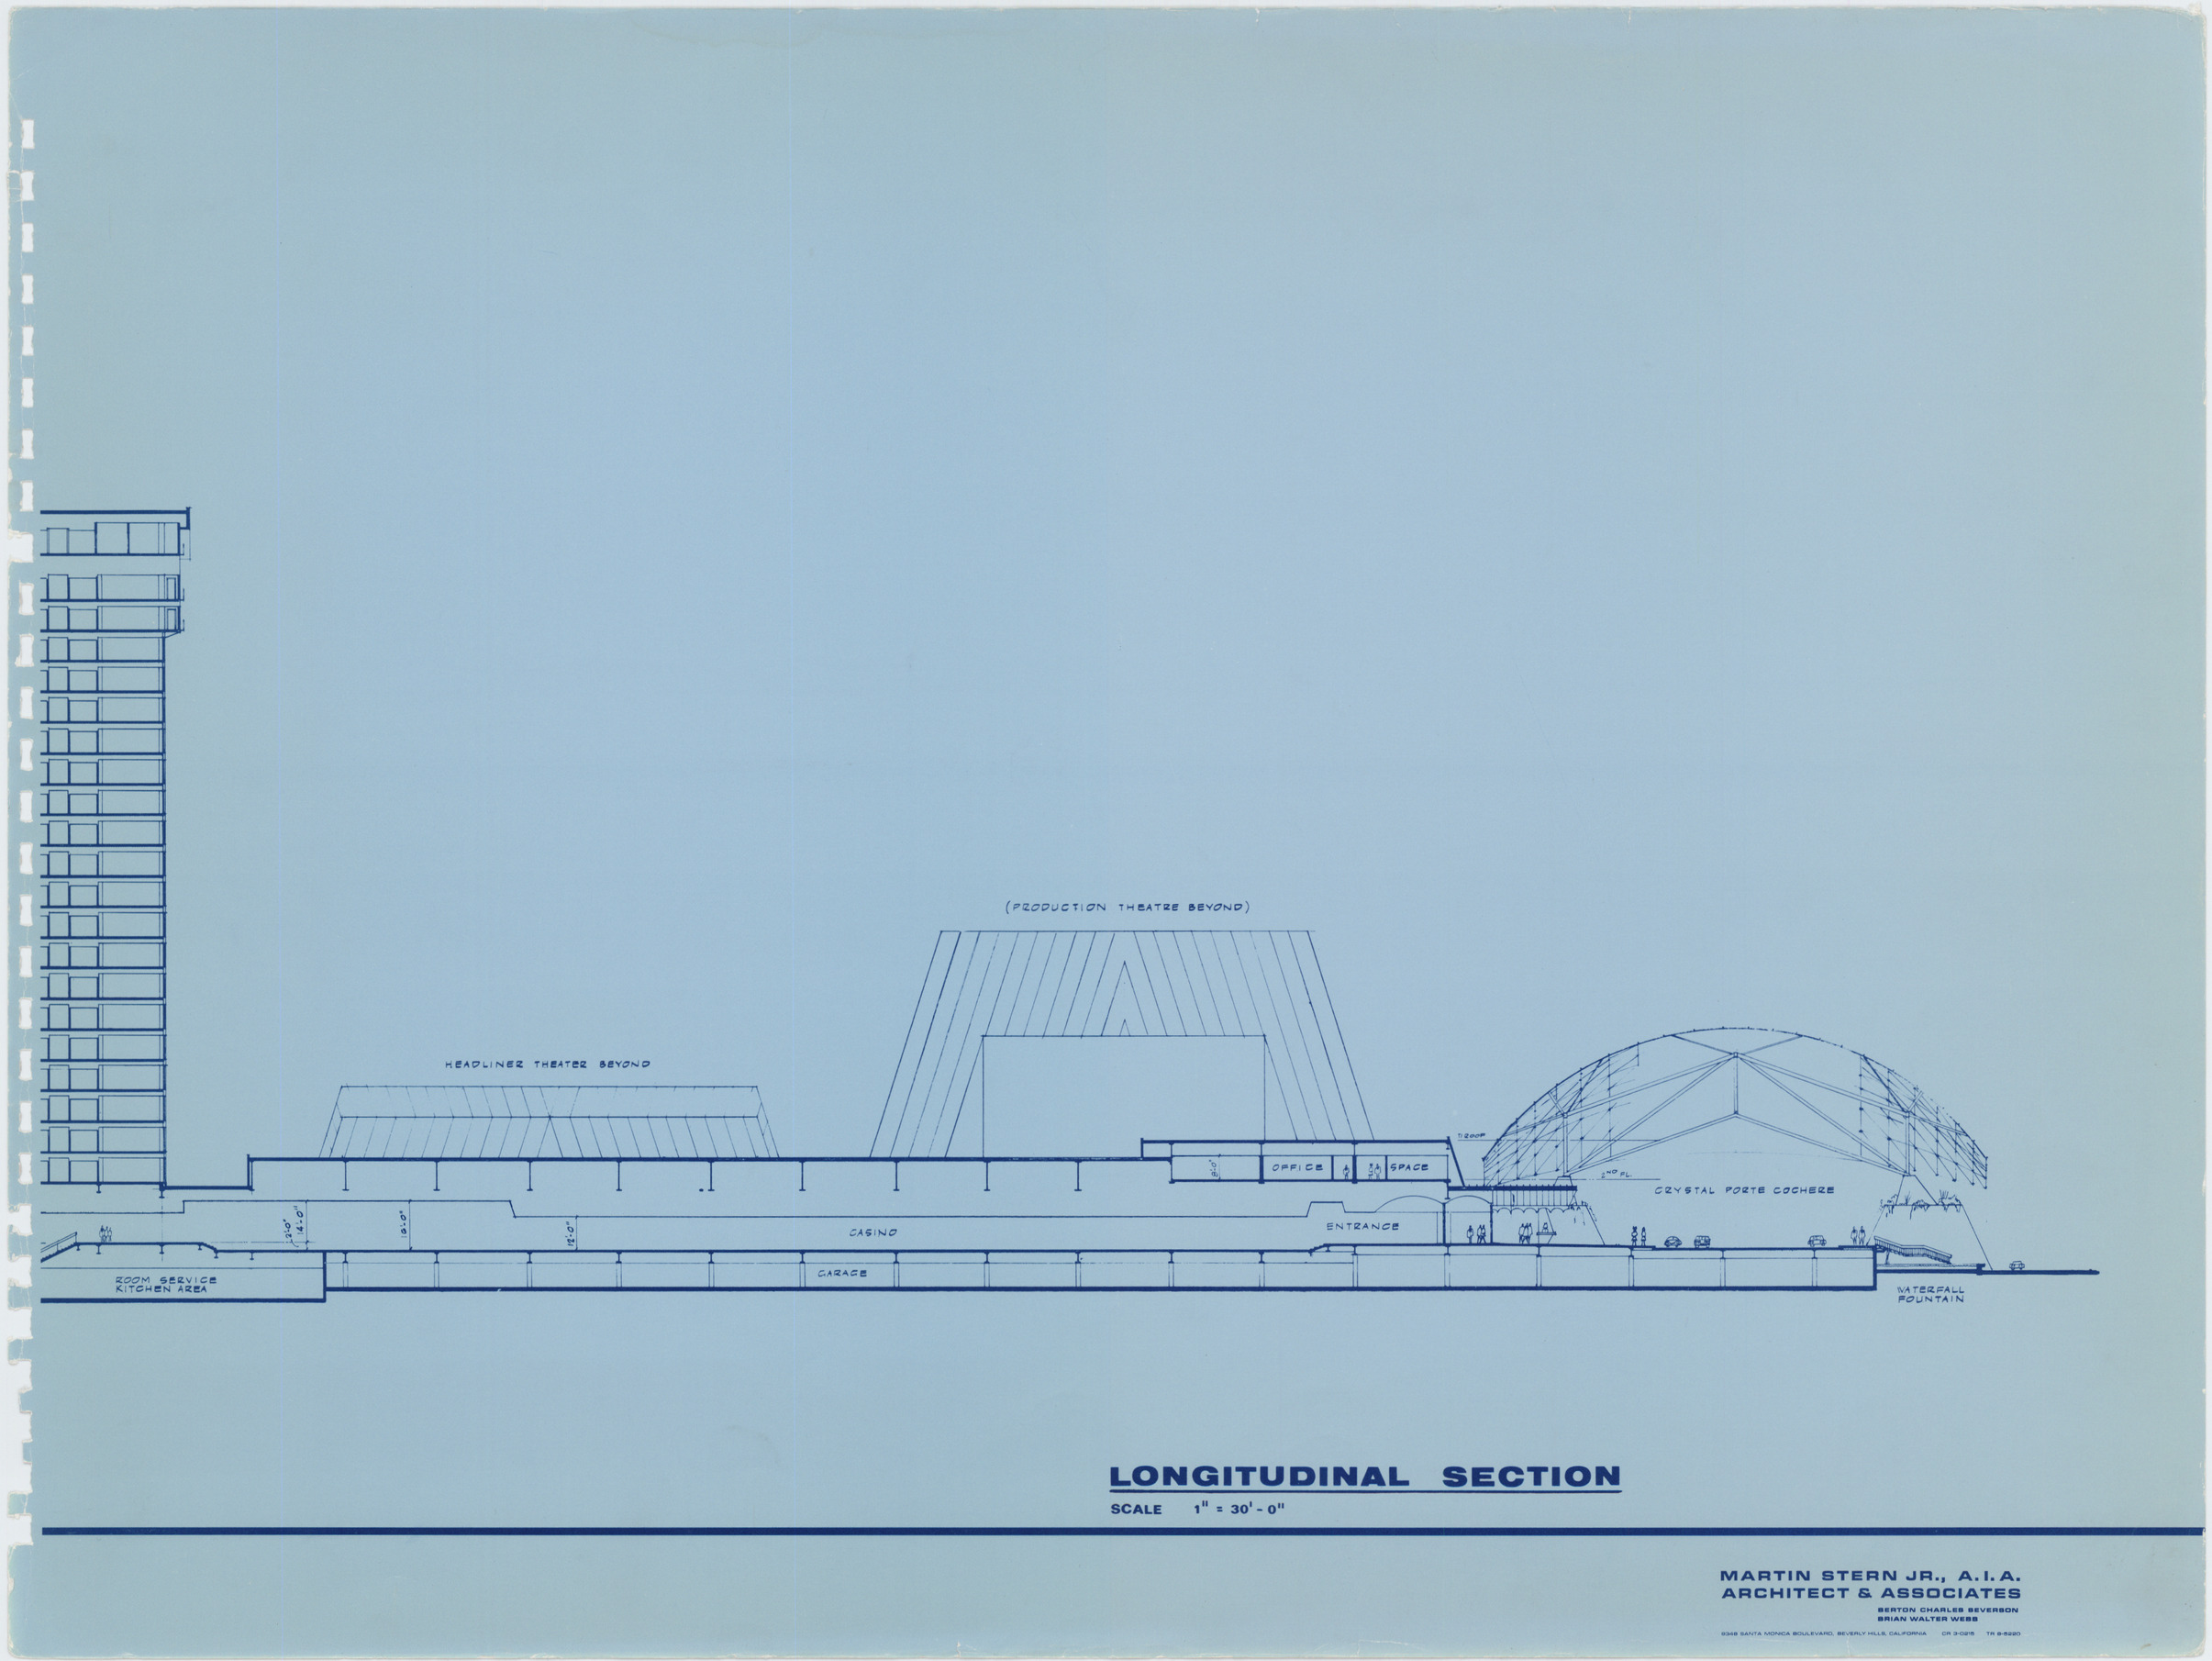 Proposal for the MGM Grand Hotel (Las Vegas), circa 1972, image 18